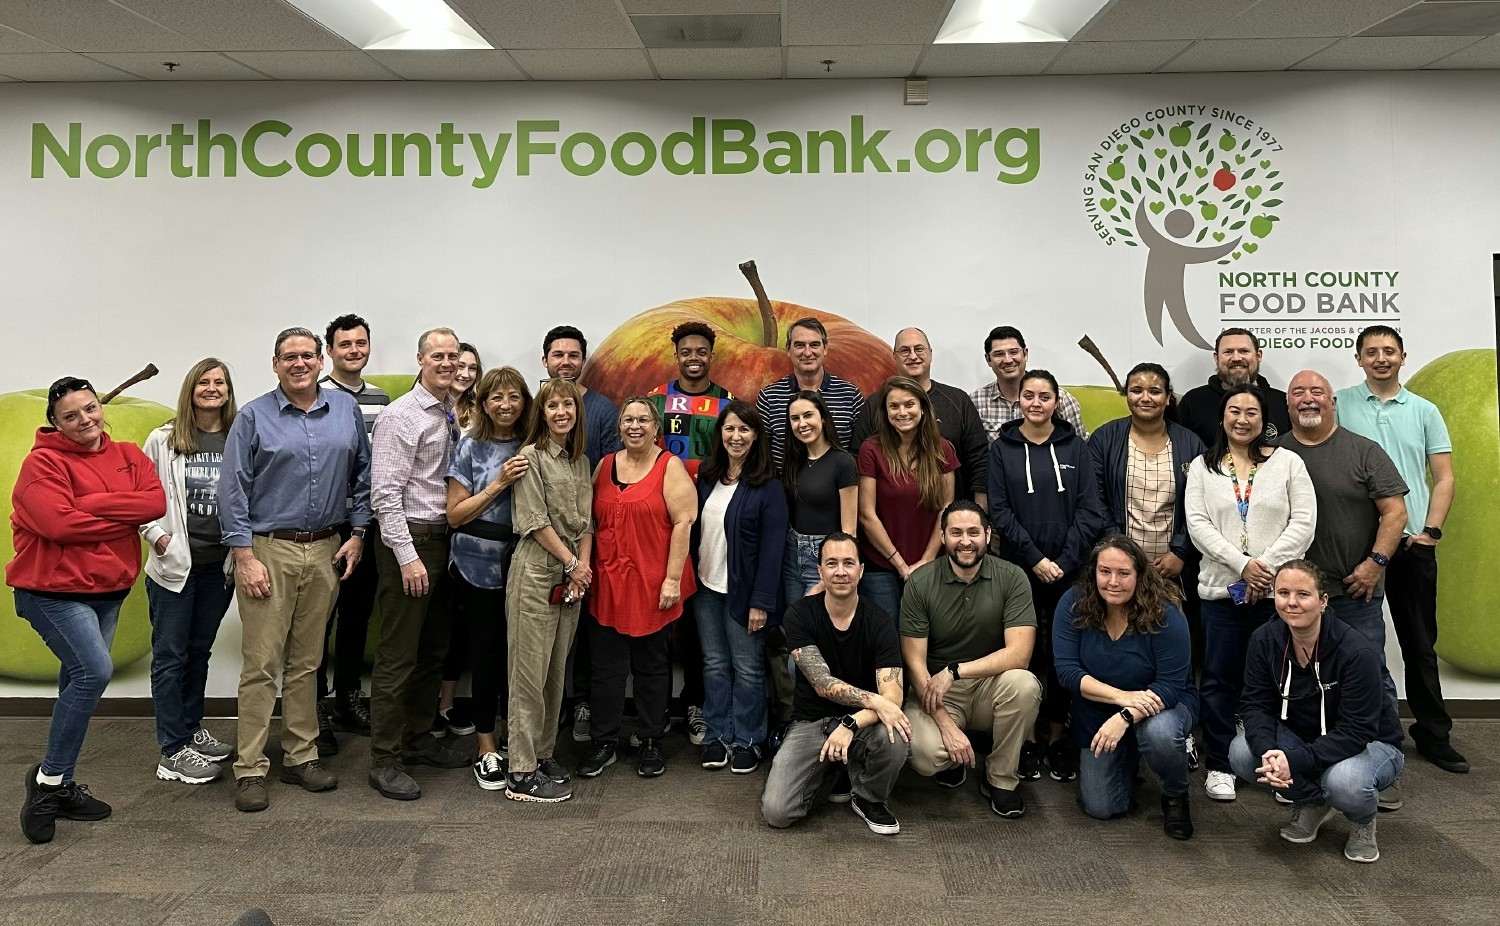 The Continuing Life team volunteering at the North County Food Bank